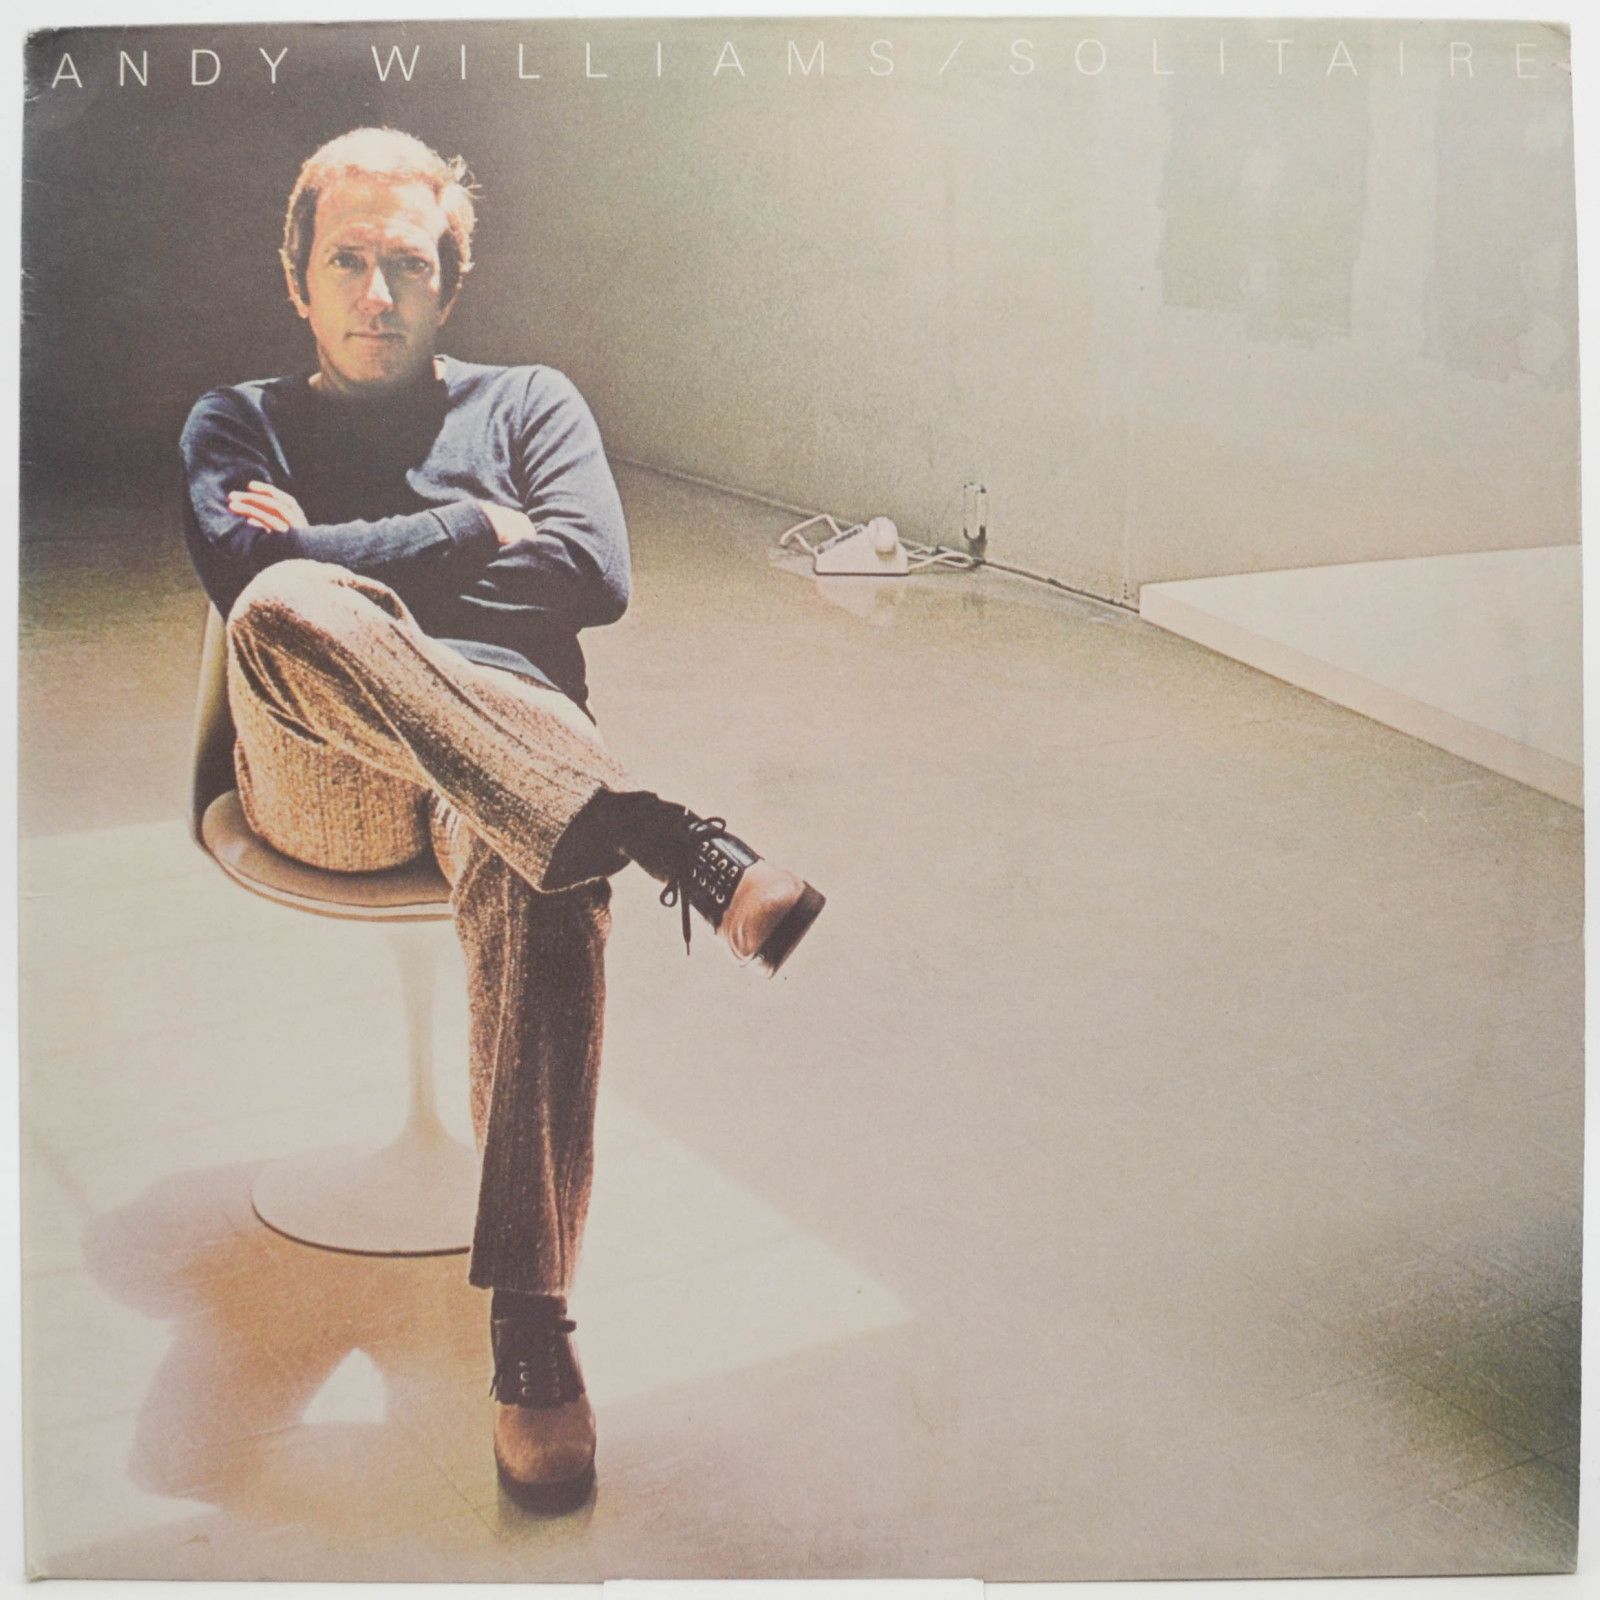 Andy Williams — Solitaire (UK), 1973